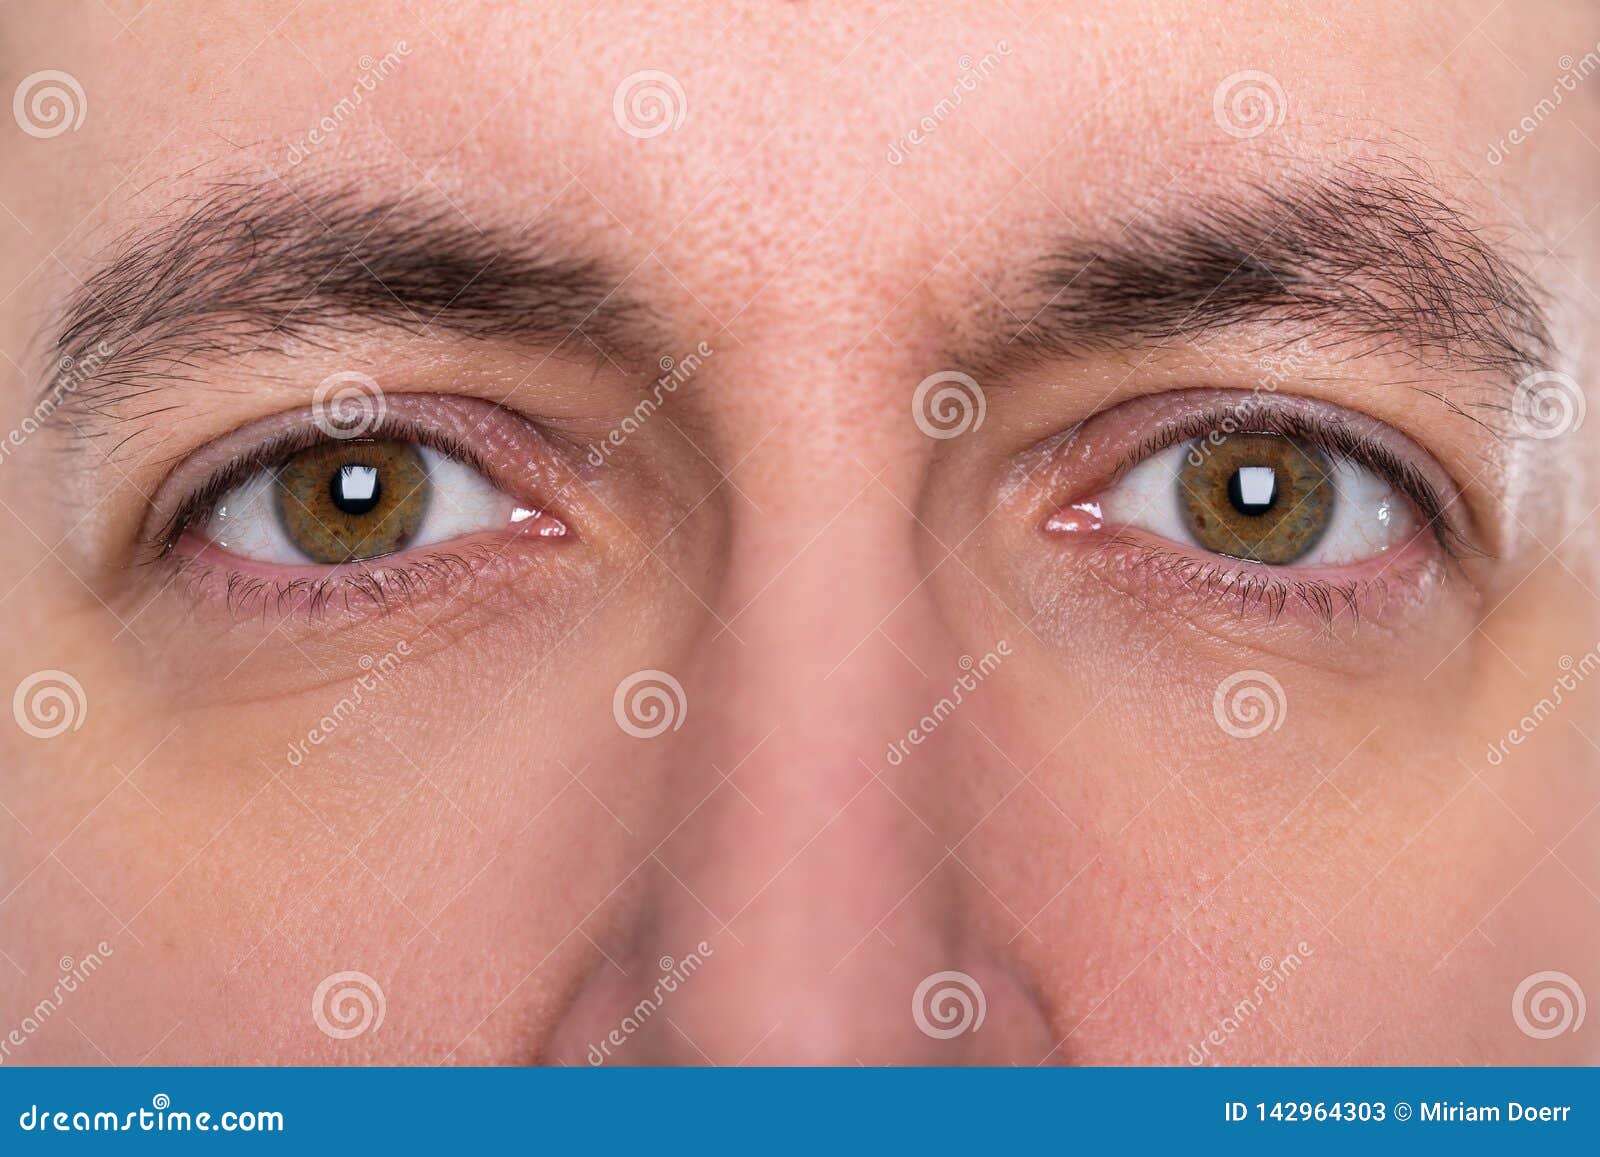 Close Up Eyes And Eyebrows From A Man Stock Image Image Of Male